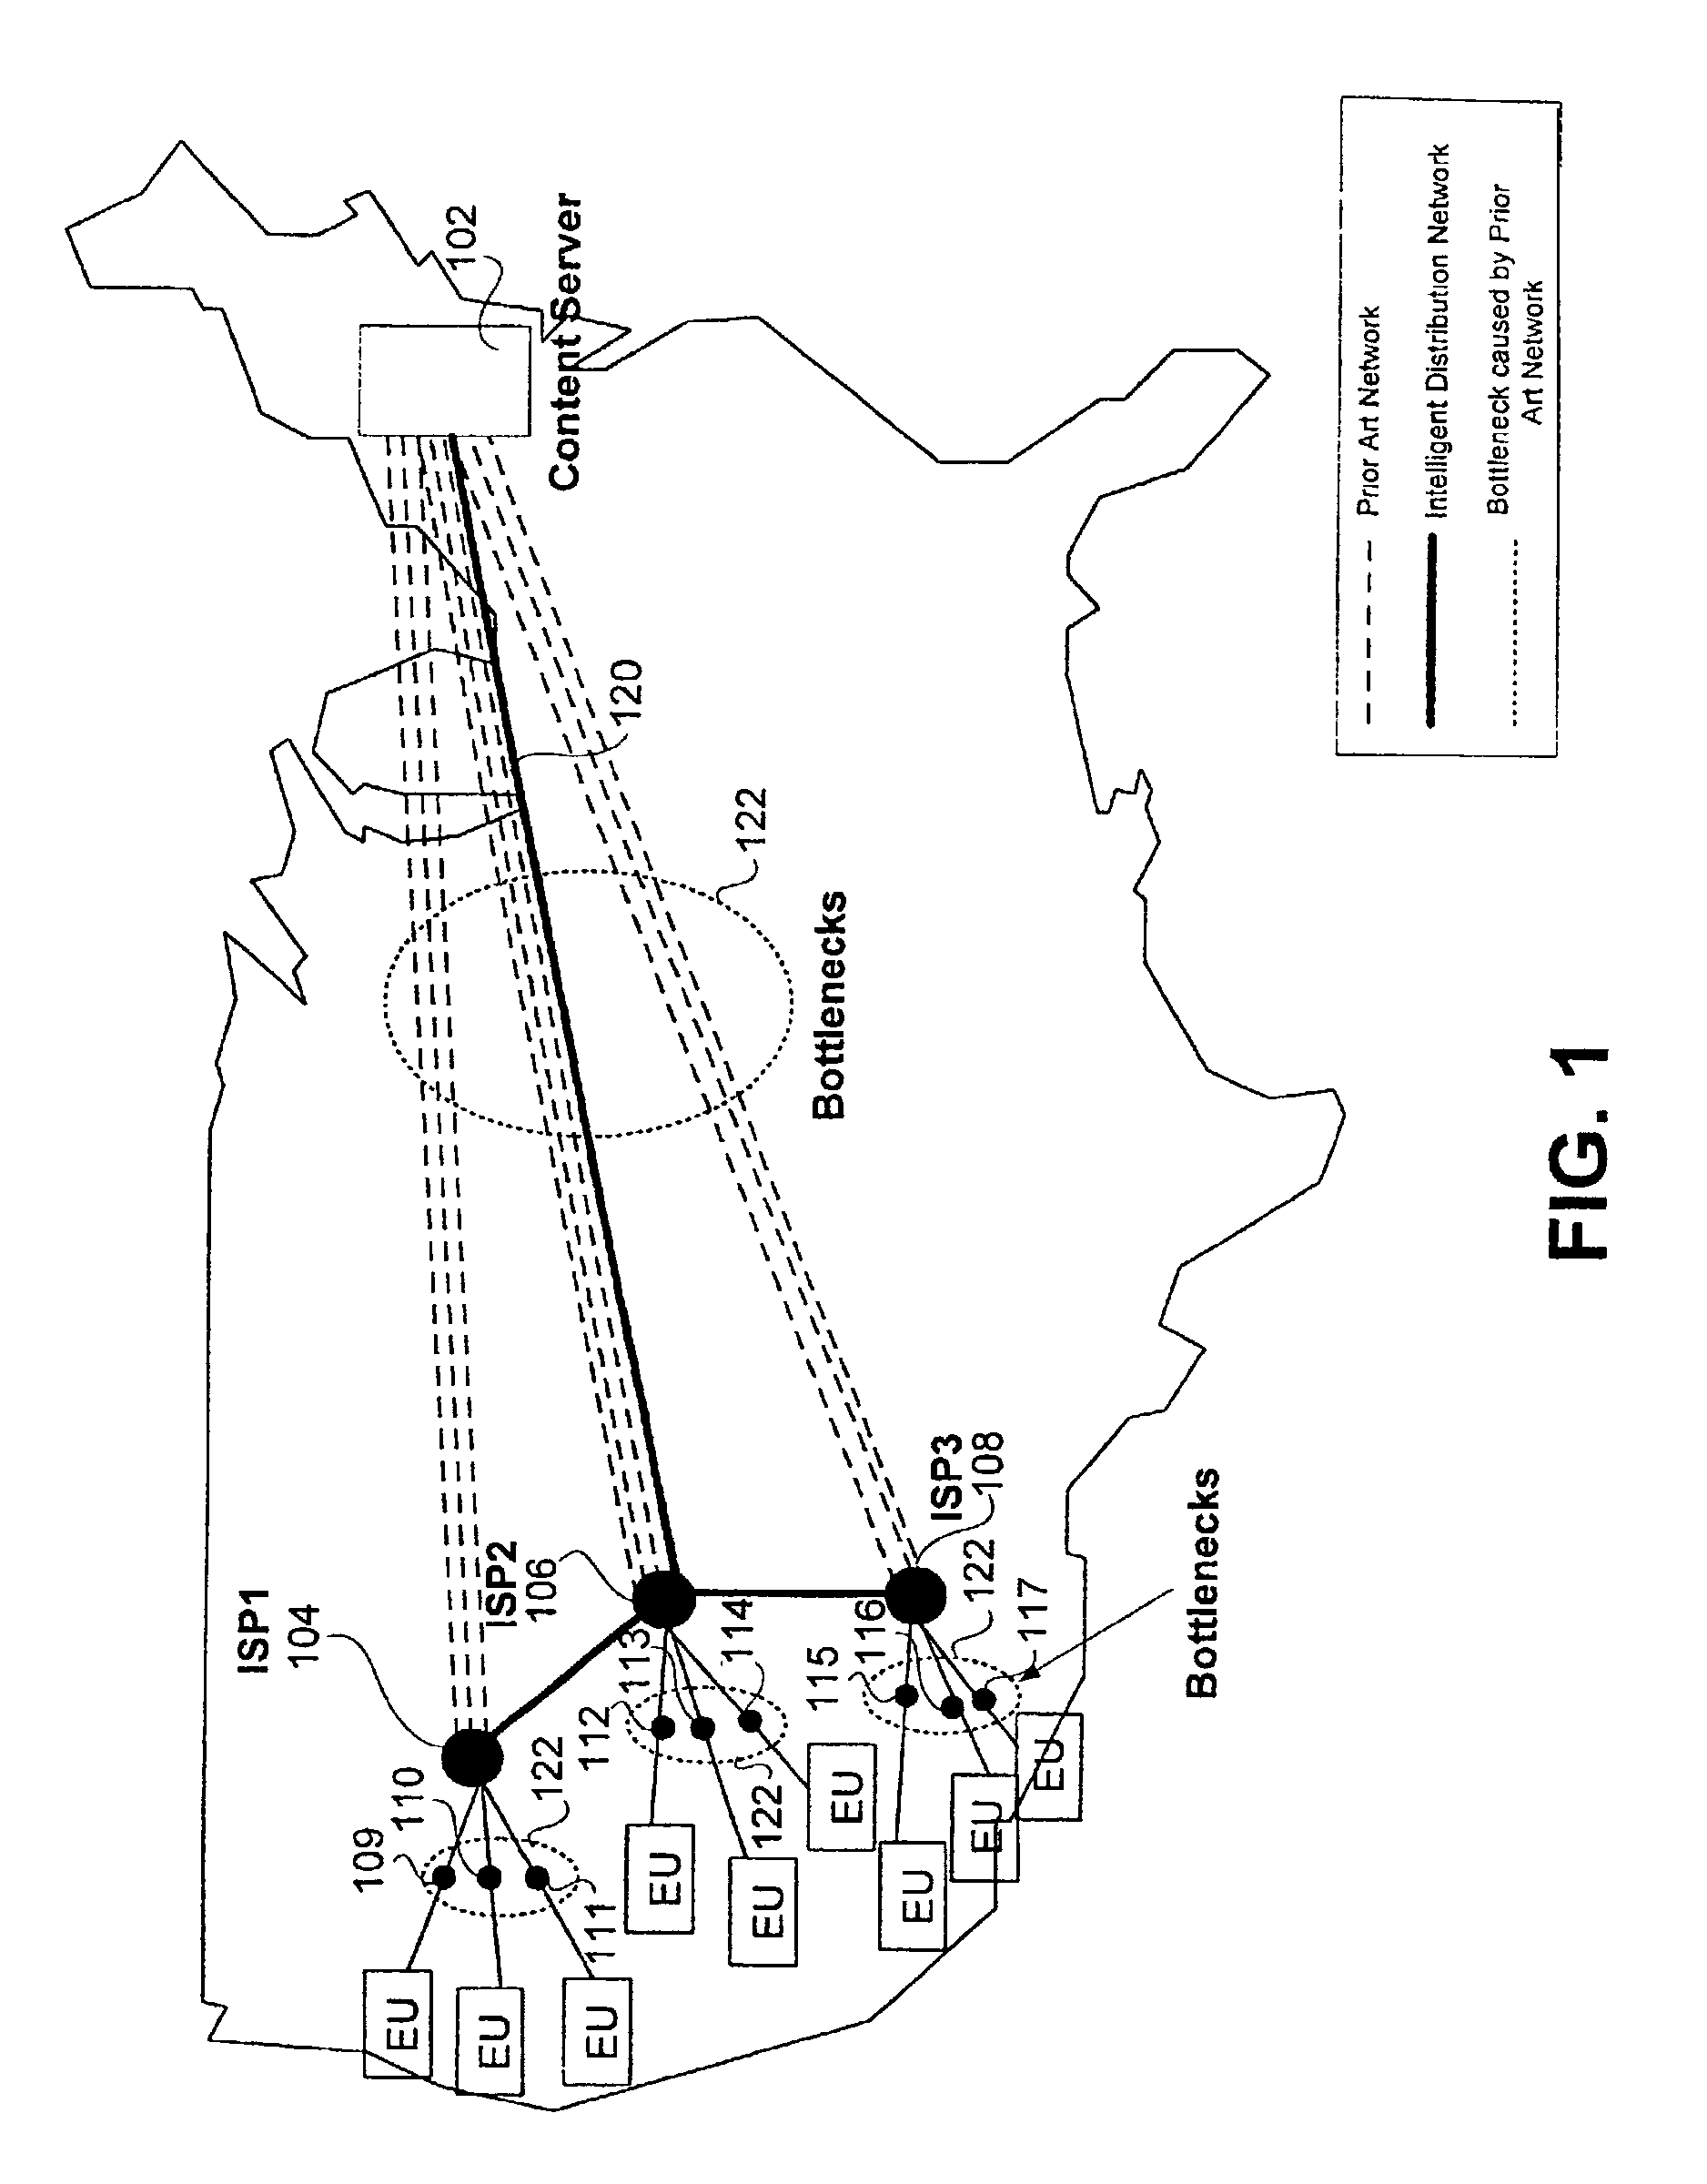 System and method for distribution of data packets utilizing an intelligent distribution network